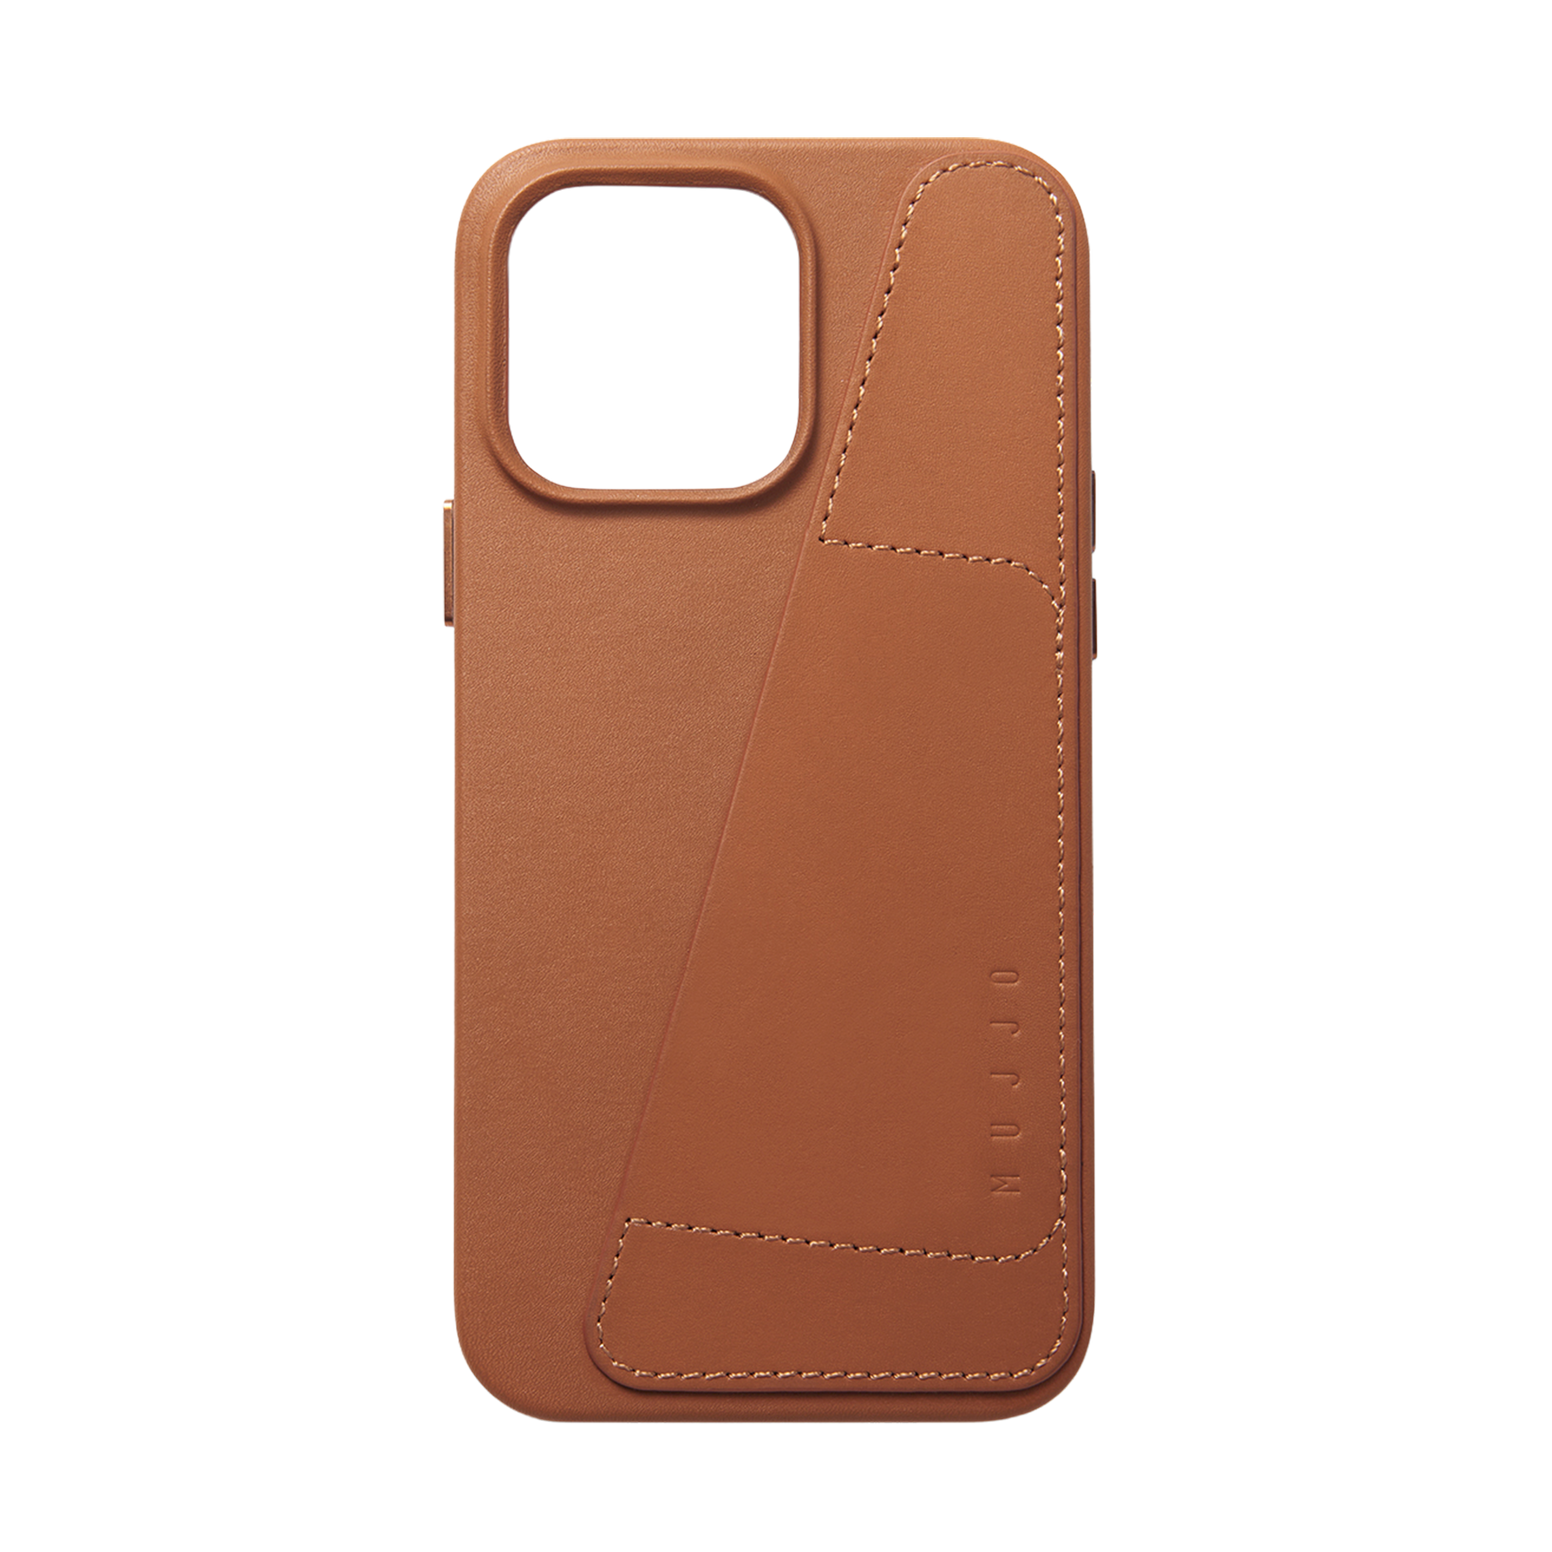 Mujjo Full Leather Wallet Case for iPhone 14 Pro Max - Tan